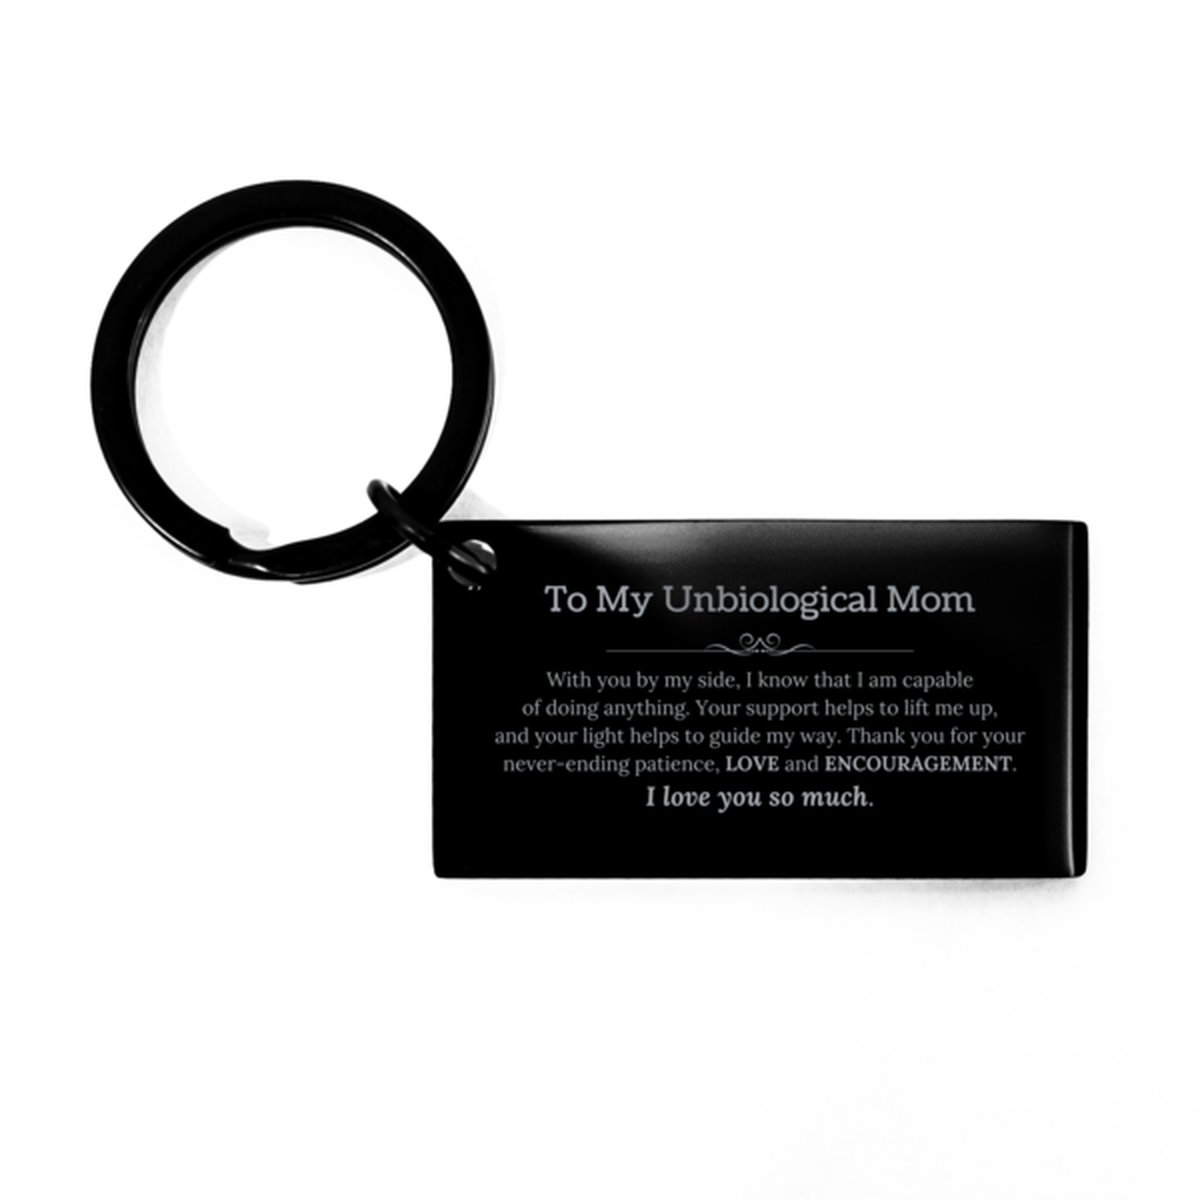 Appreciation Unbiological Mom Keychain Gifts, To My Unbiological Mom Birthday Christmas Wedding Keepsake Gifts for Unbiological Mom With you by my side, I know that I am capable of doing anything. I love you so much